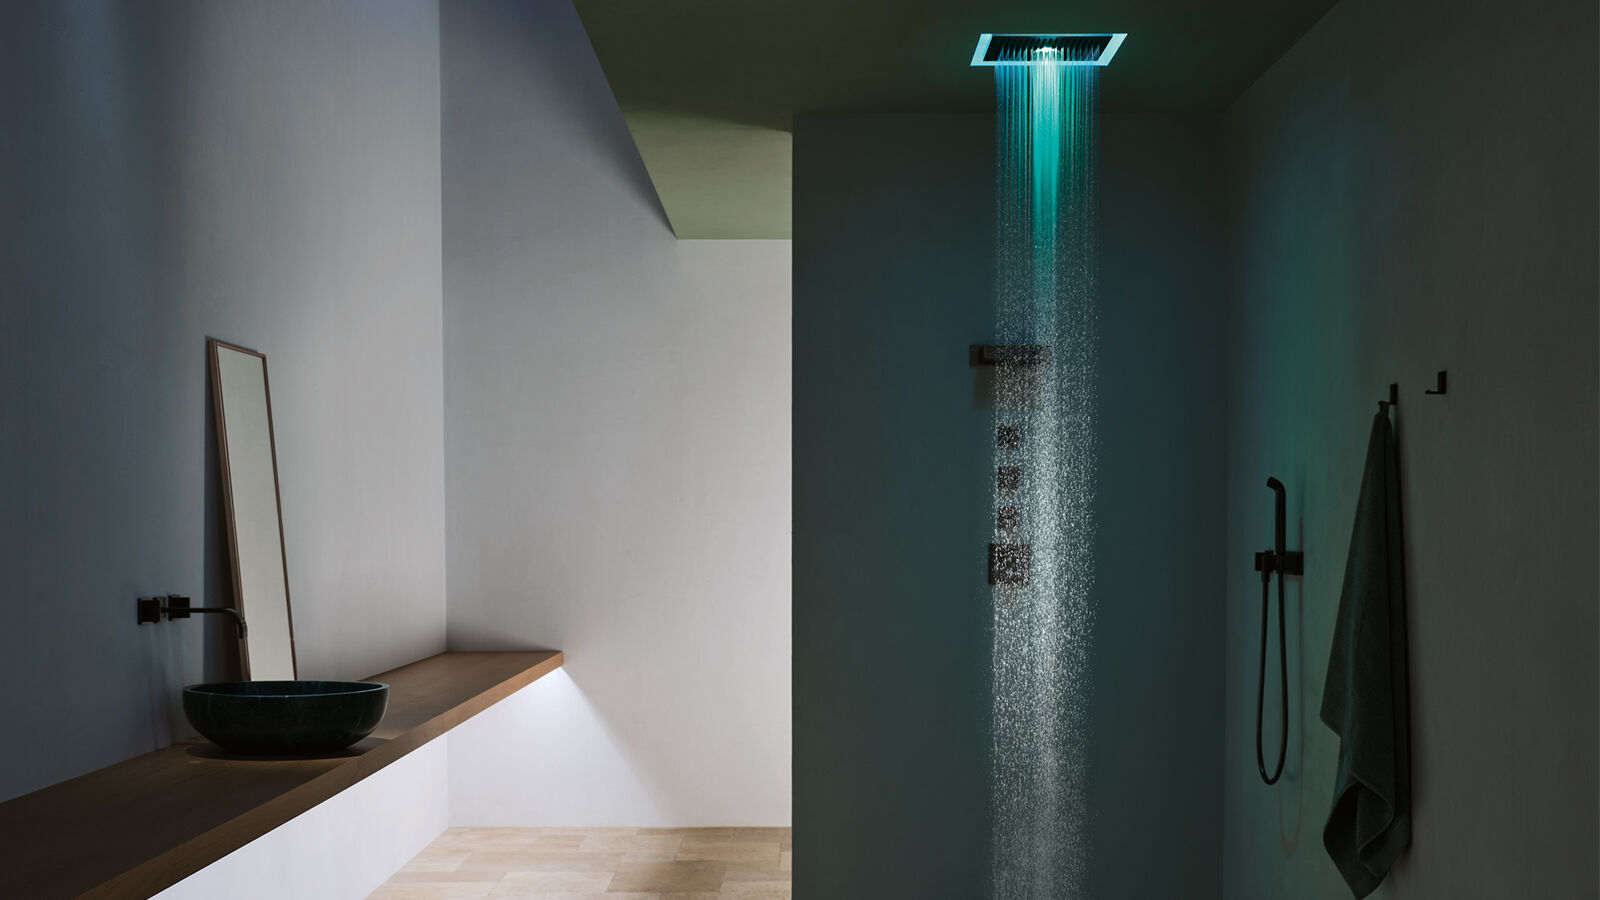 A new kind of shower experience